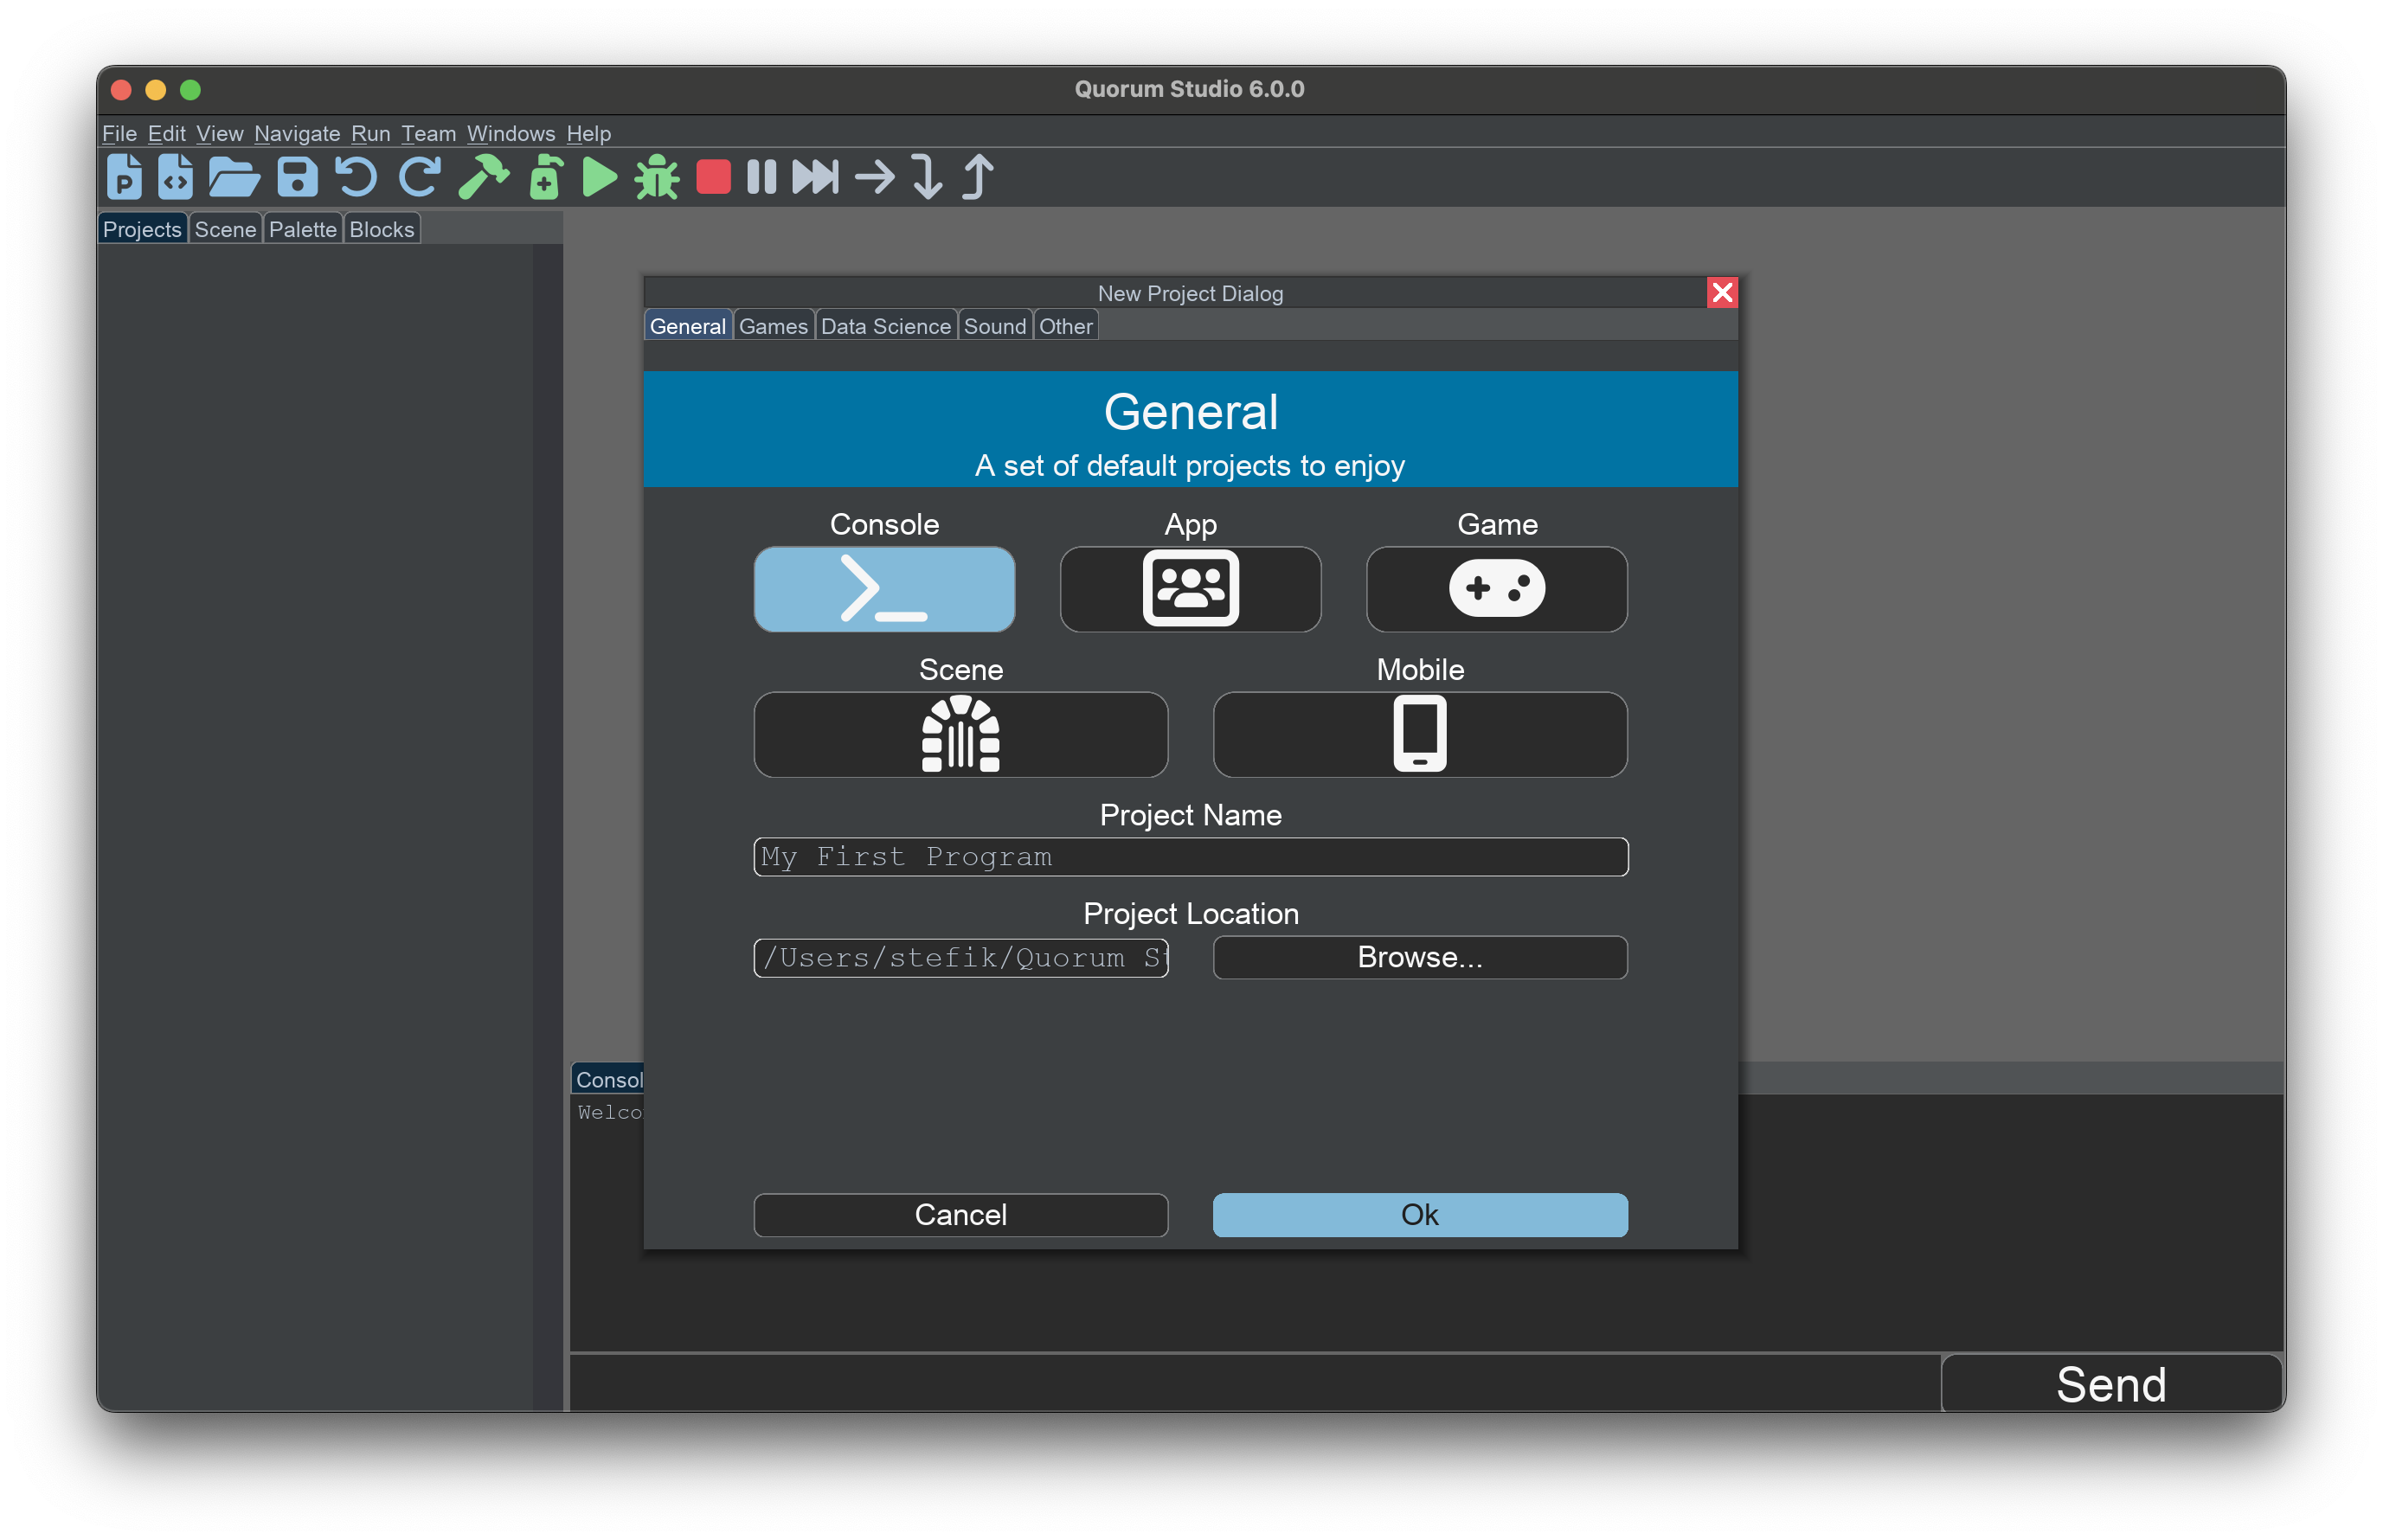 This image shows Quorum Studio's New Project Dialog. The dialog contains 5 tabs with various kinds of projects on them. For this screen, it contains console, app, game, scene, and mobile. For each, you can set the project name and location.